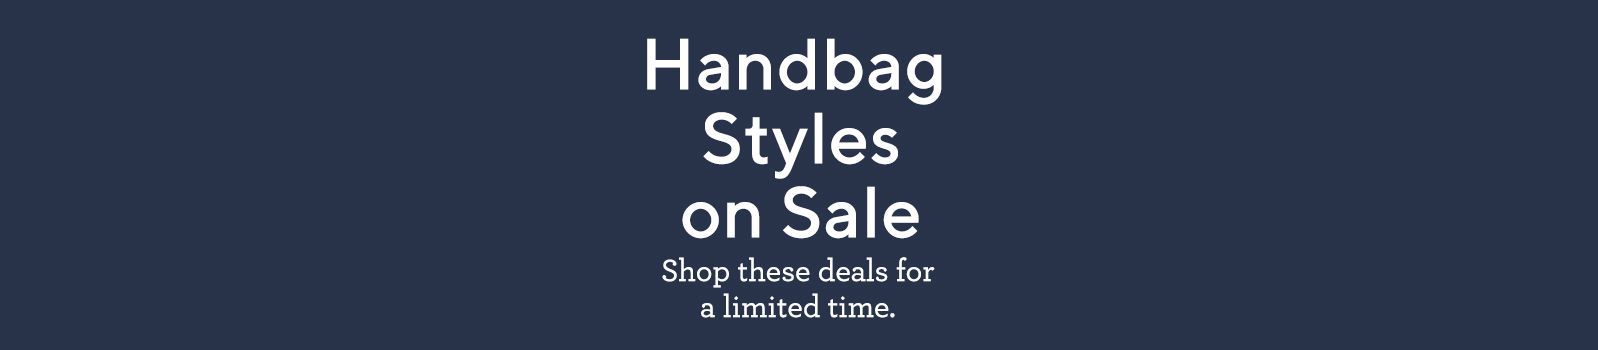 Handbag Styles on Sale: Shop these deals for a limited time.